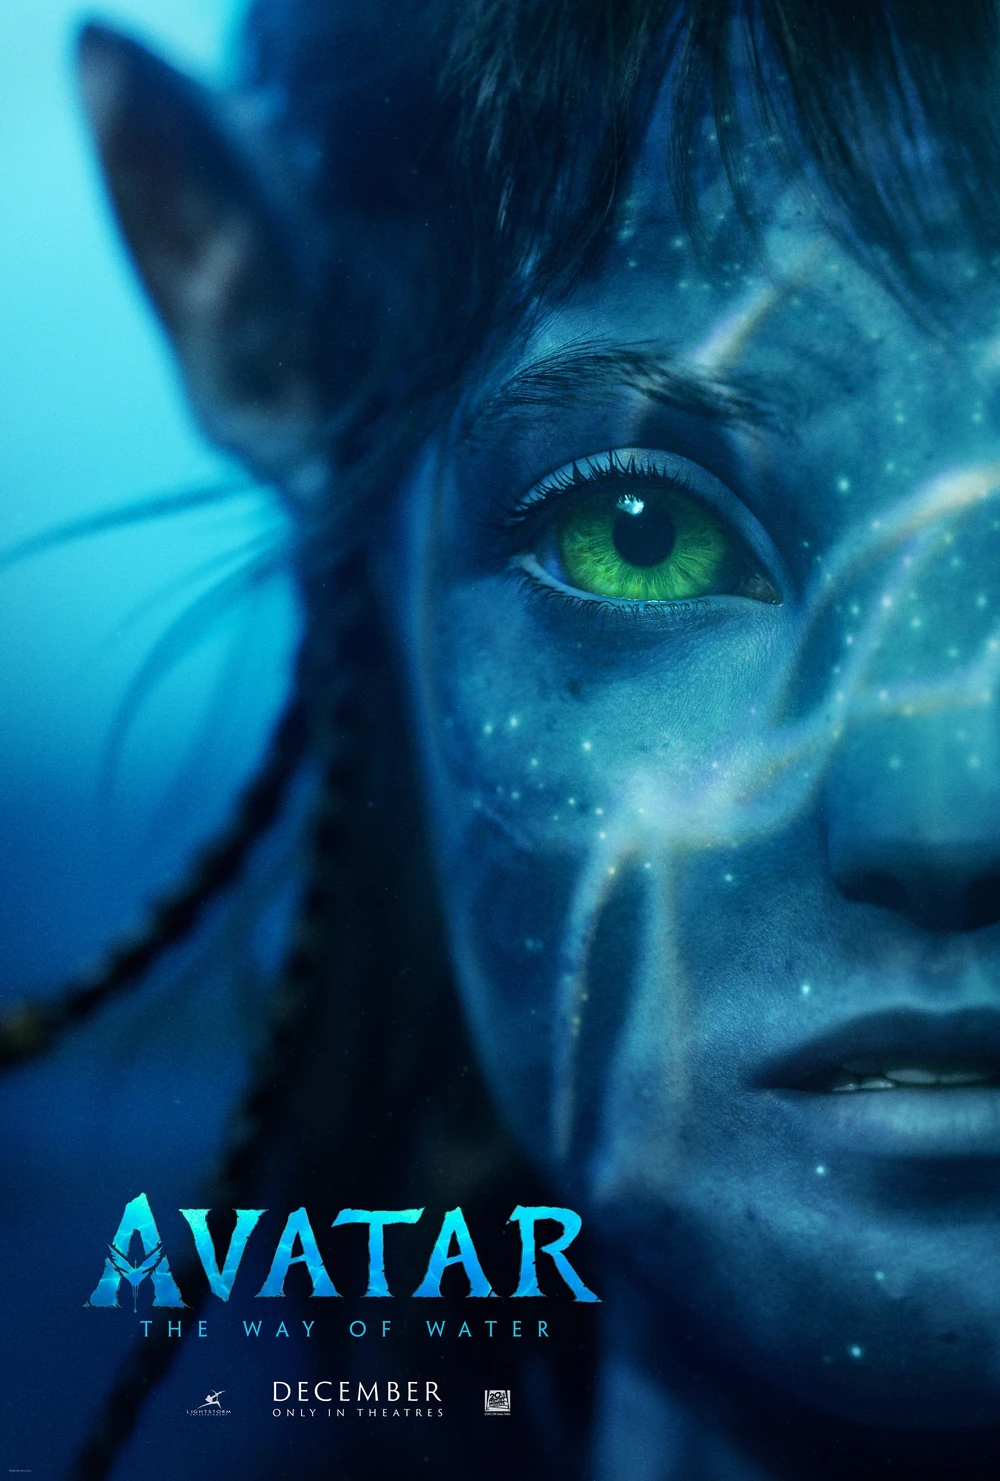 Avatar_The_Way_of_Water_Teaser_Poster